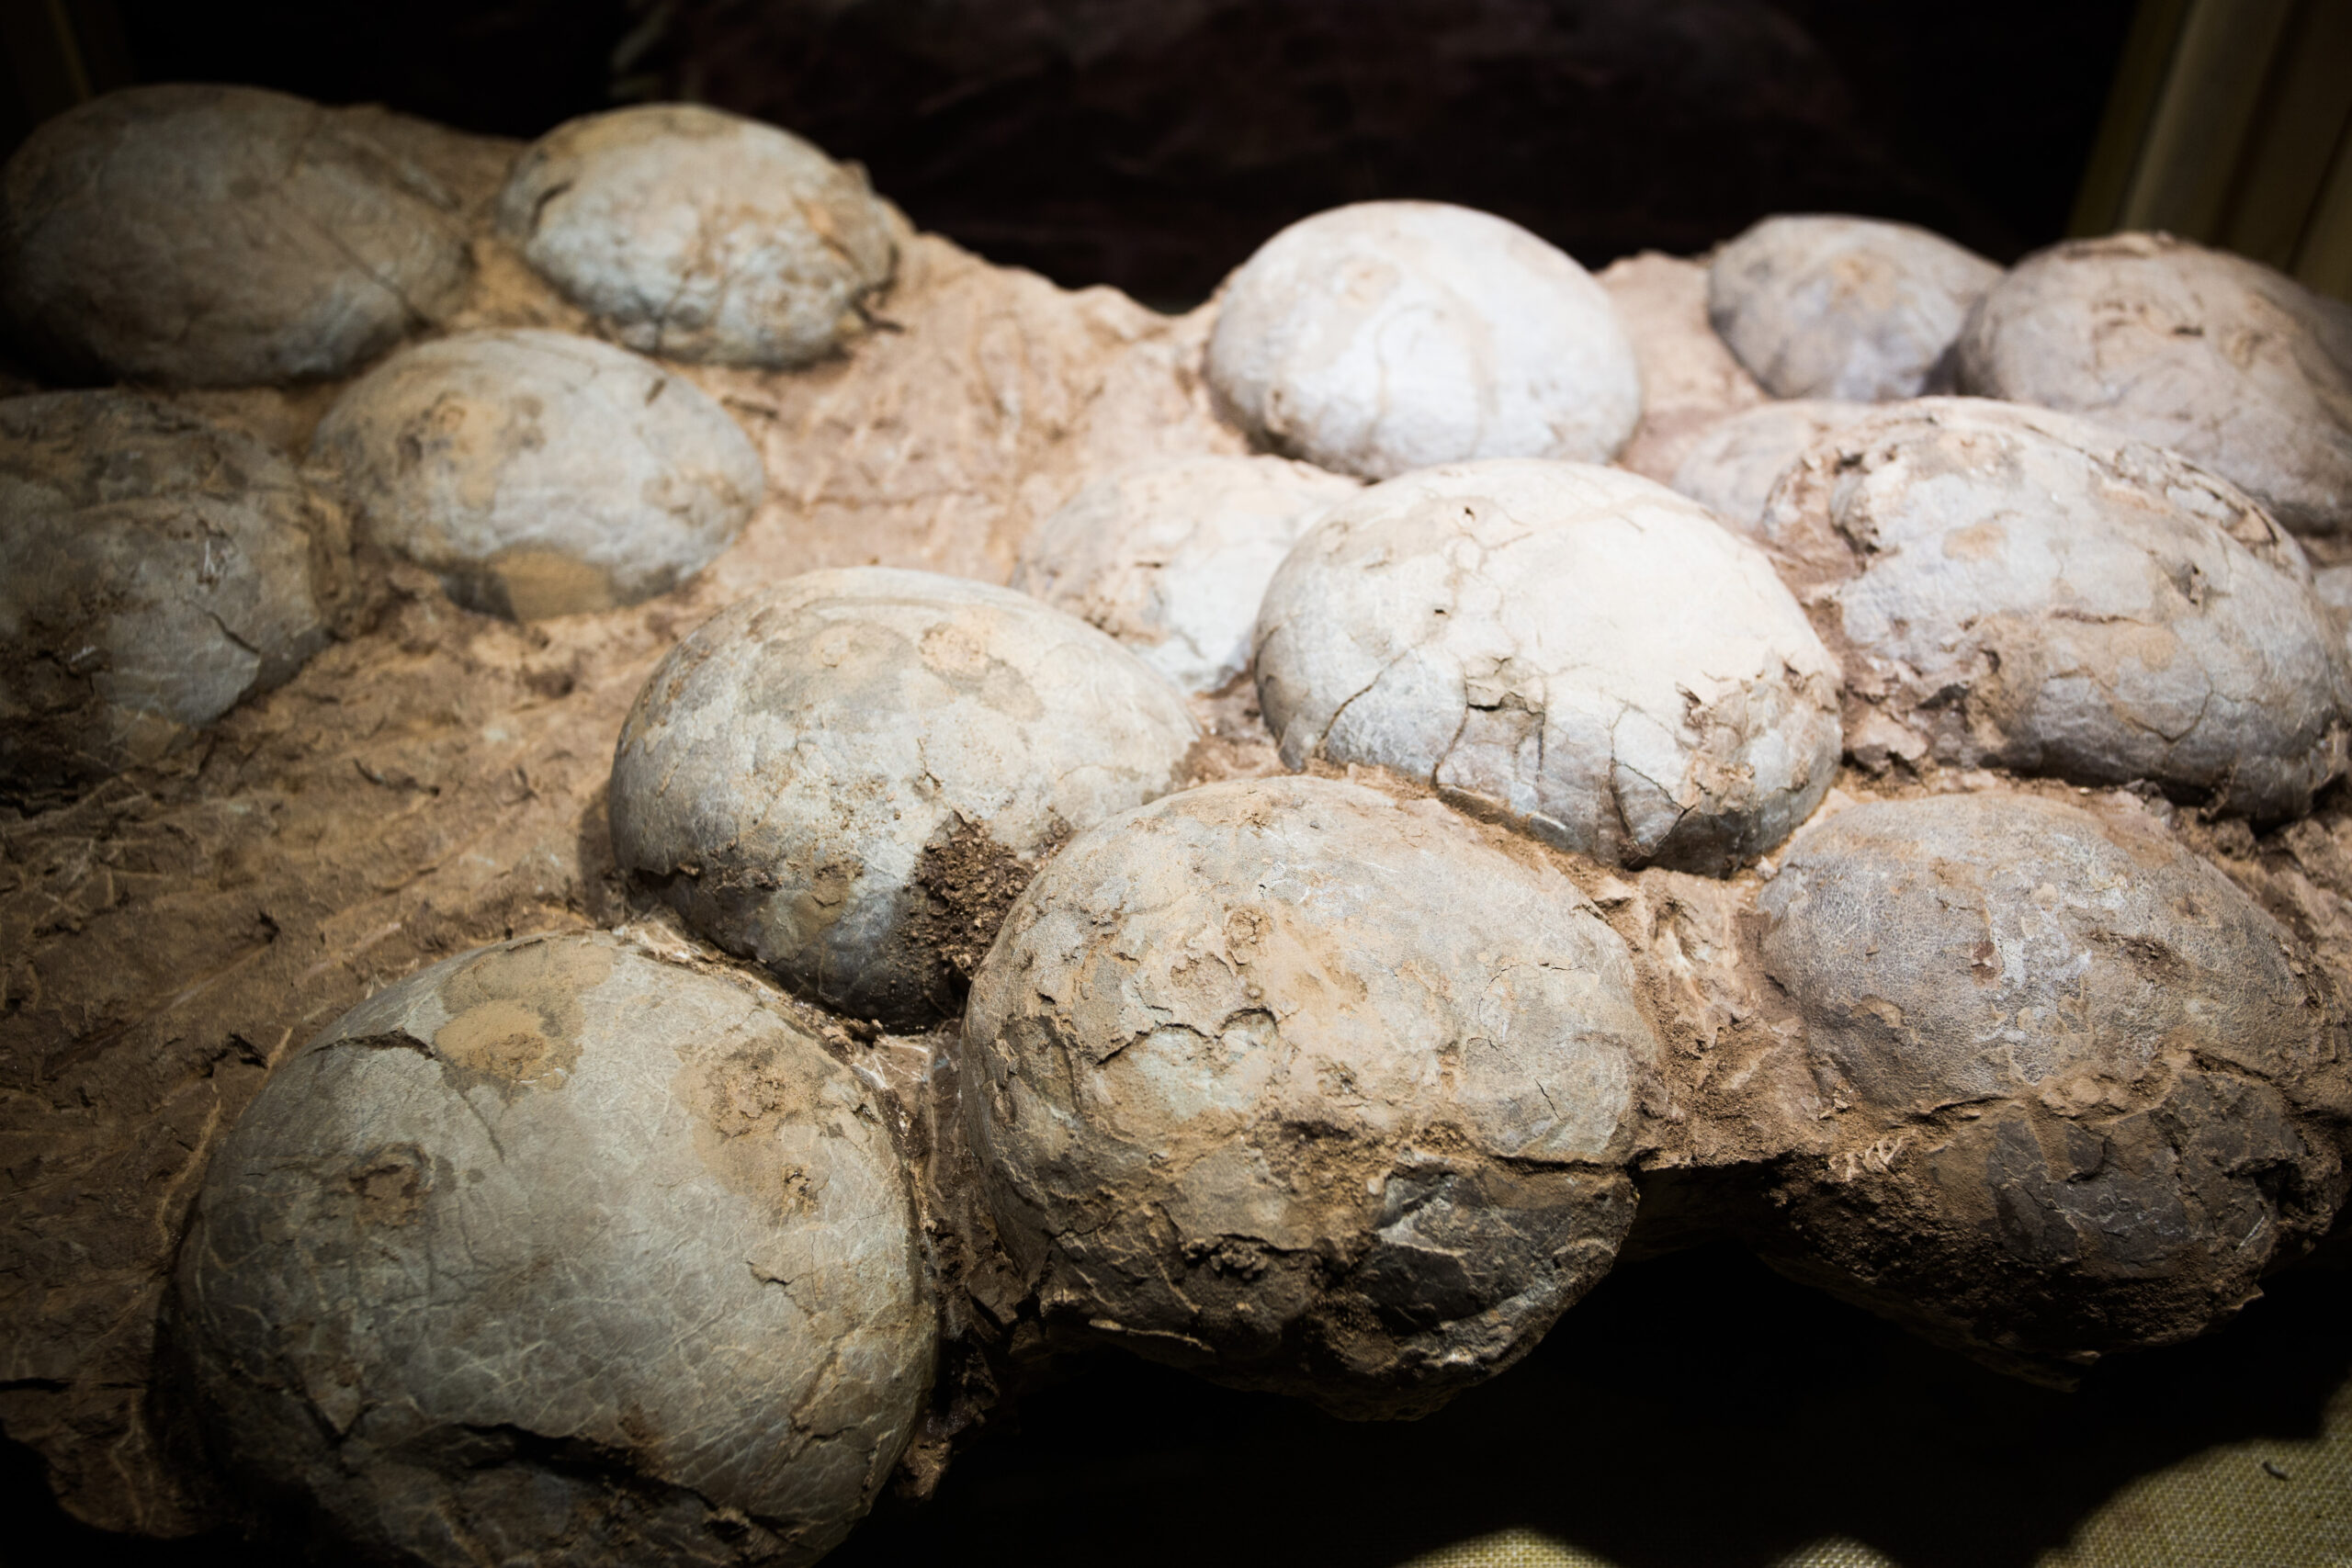 These 5 Dinosaur Nests Are Among the Greatest Ever Found